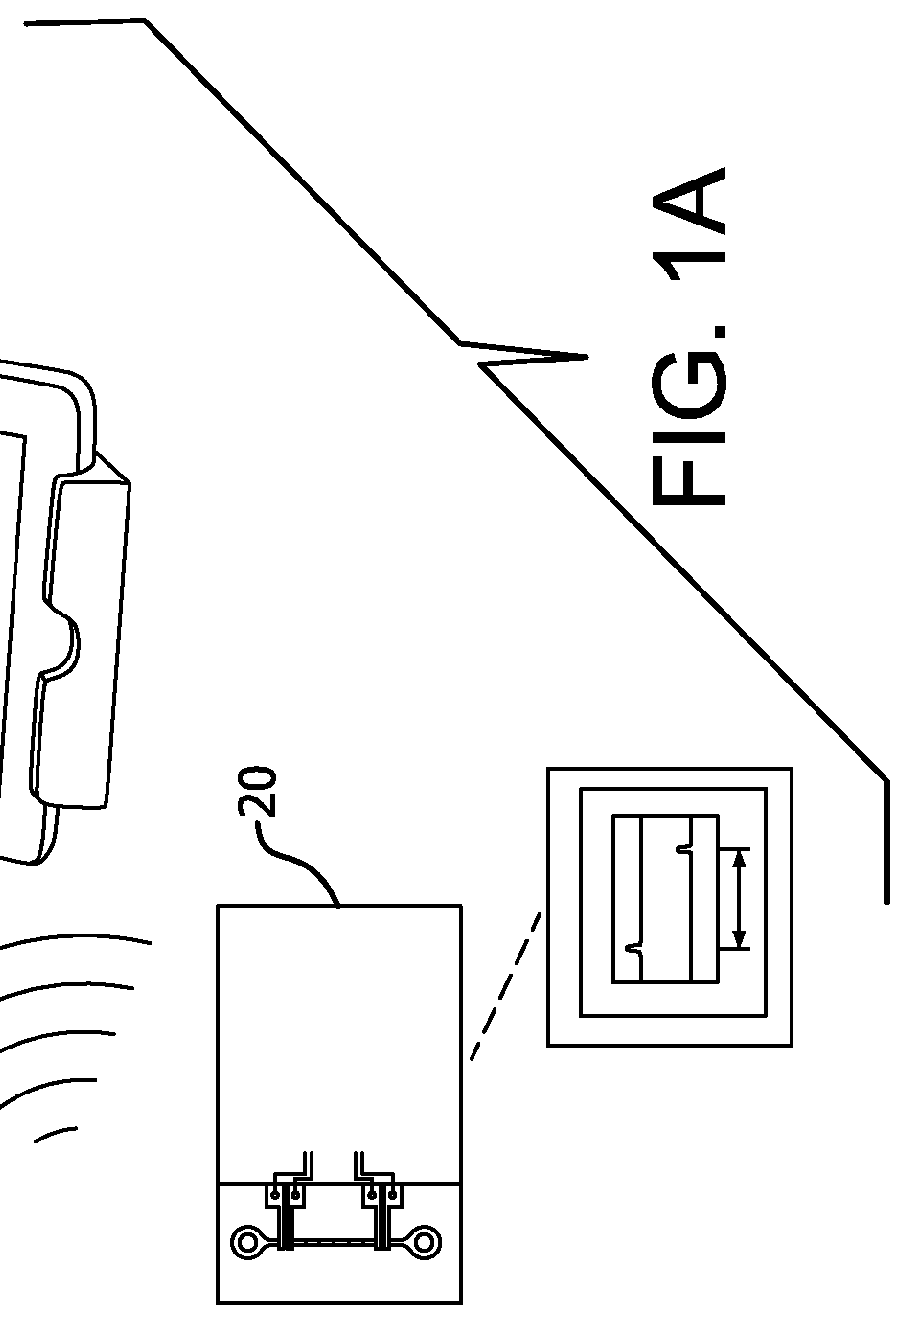 Smart adapter for infusion devices